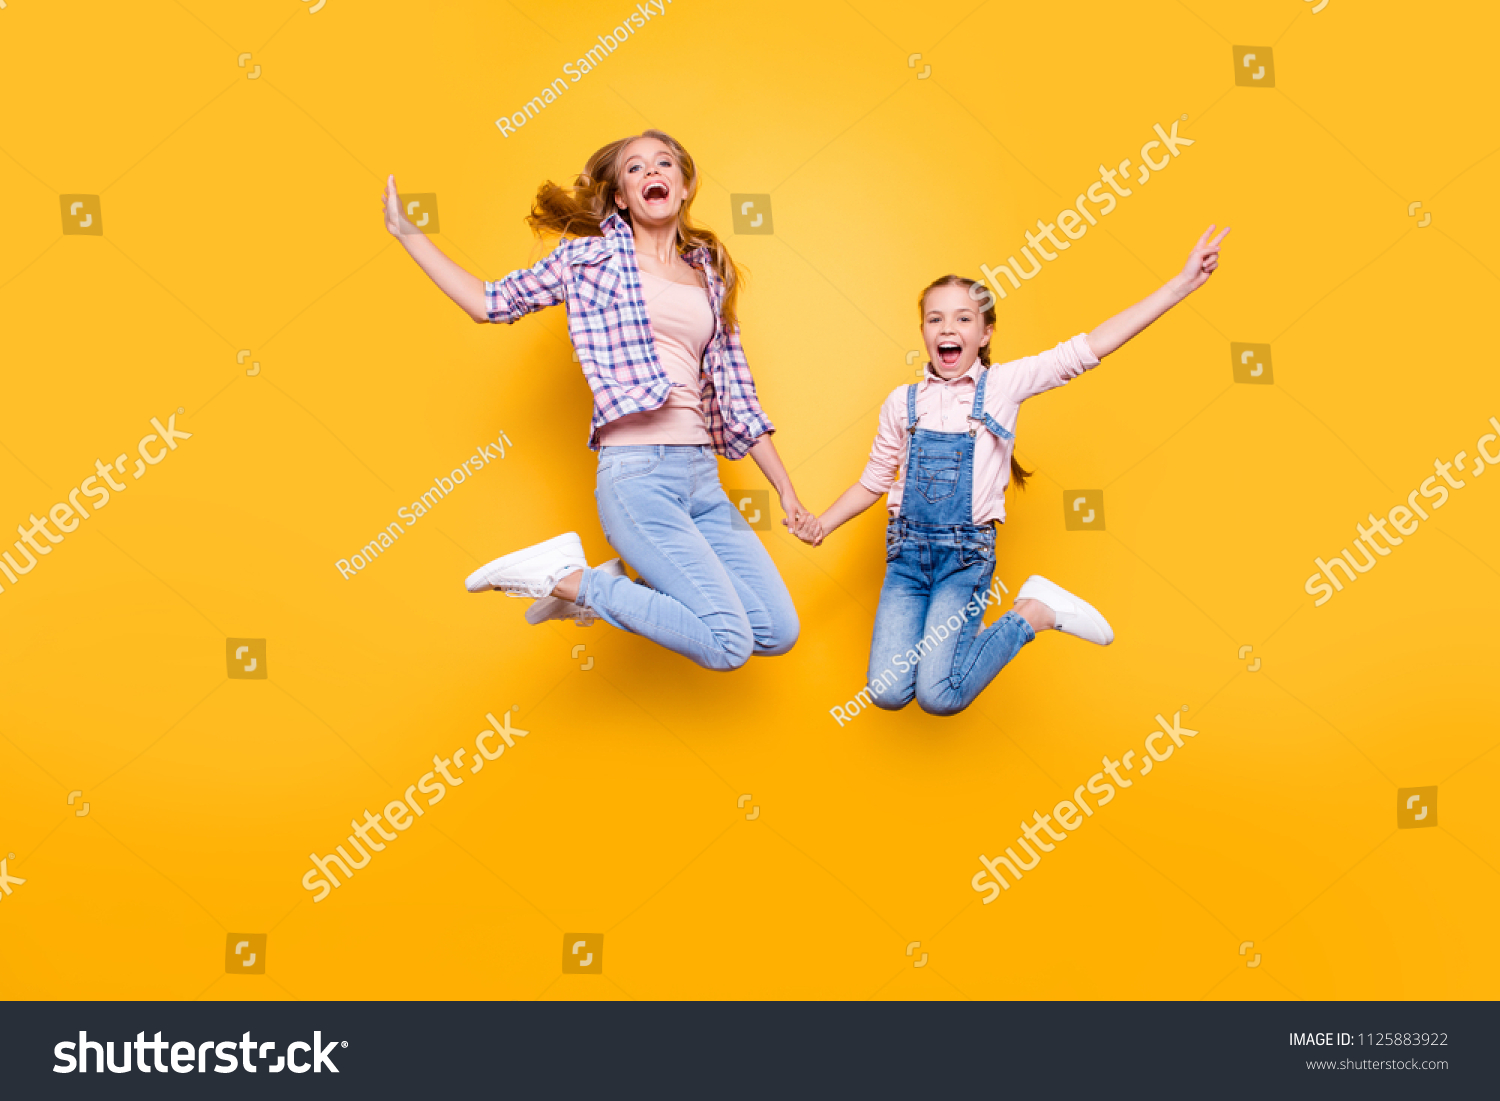 Mom mum mommy maternity two people best friendship upbringing rejoicing concept. Full length size portrait of cheerful joyful stylish modern relatives jumping up in air isolated on bright background #1125883922